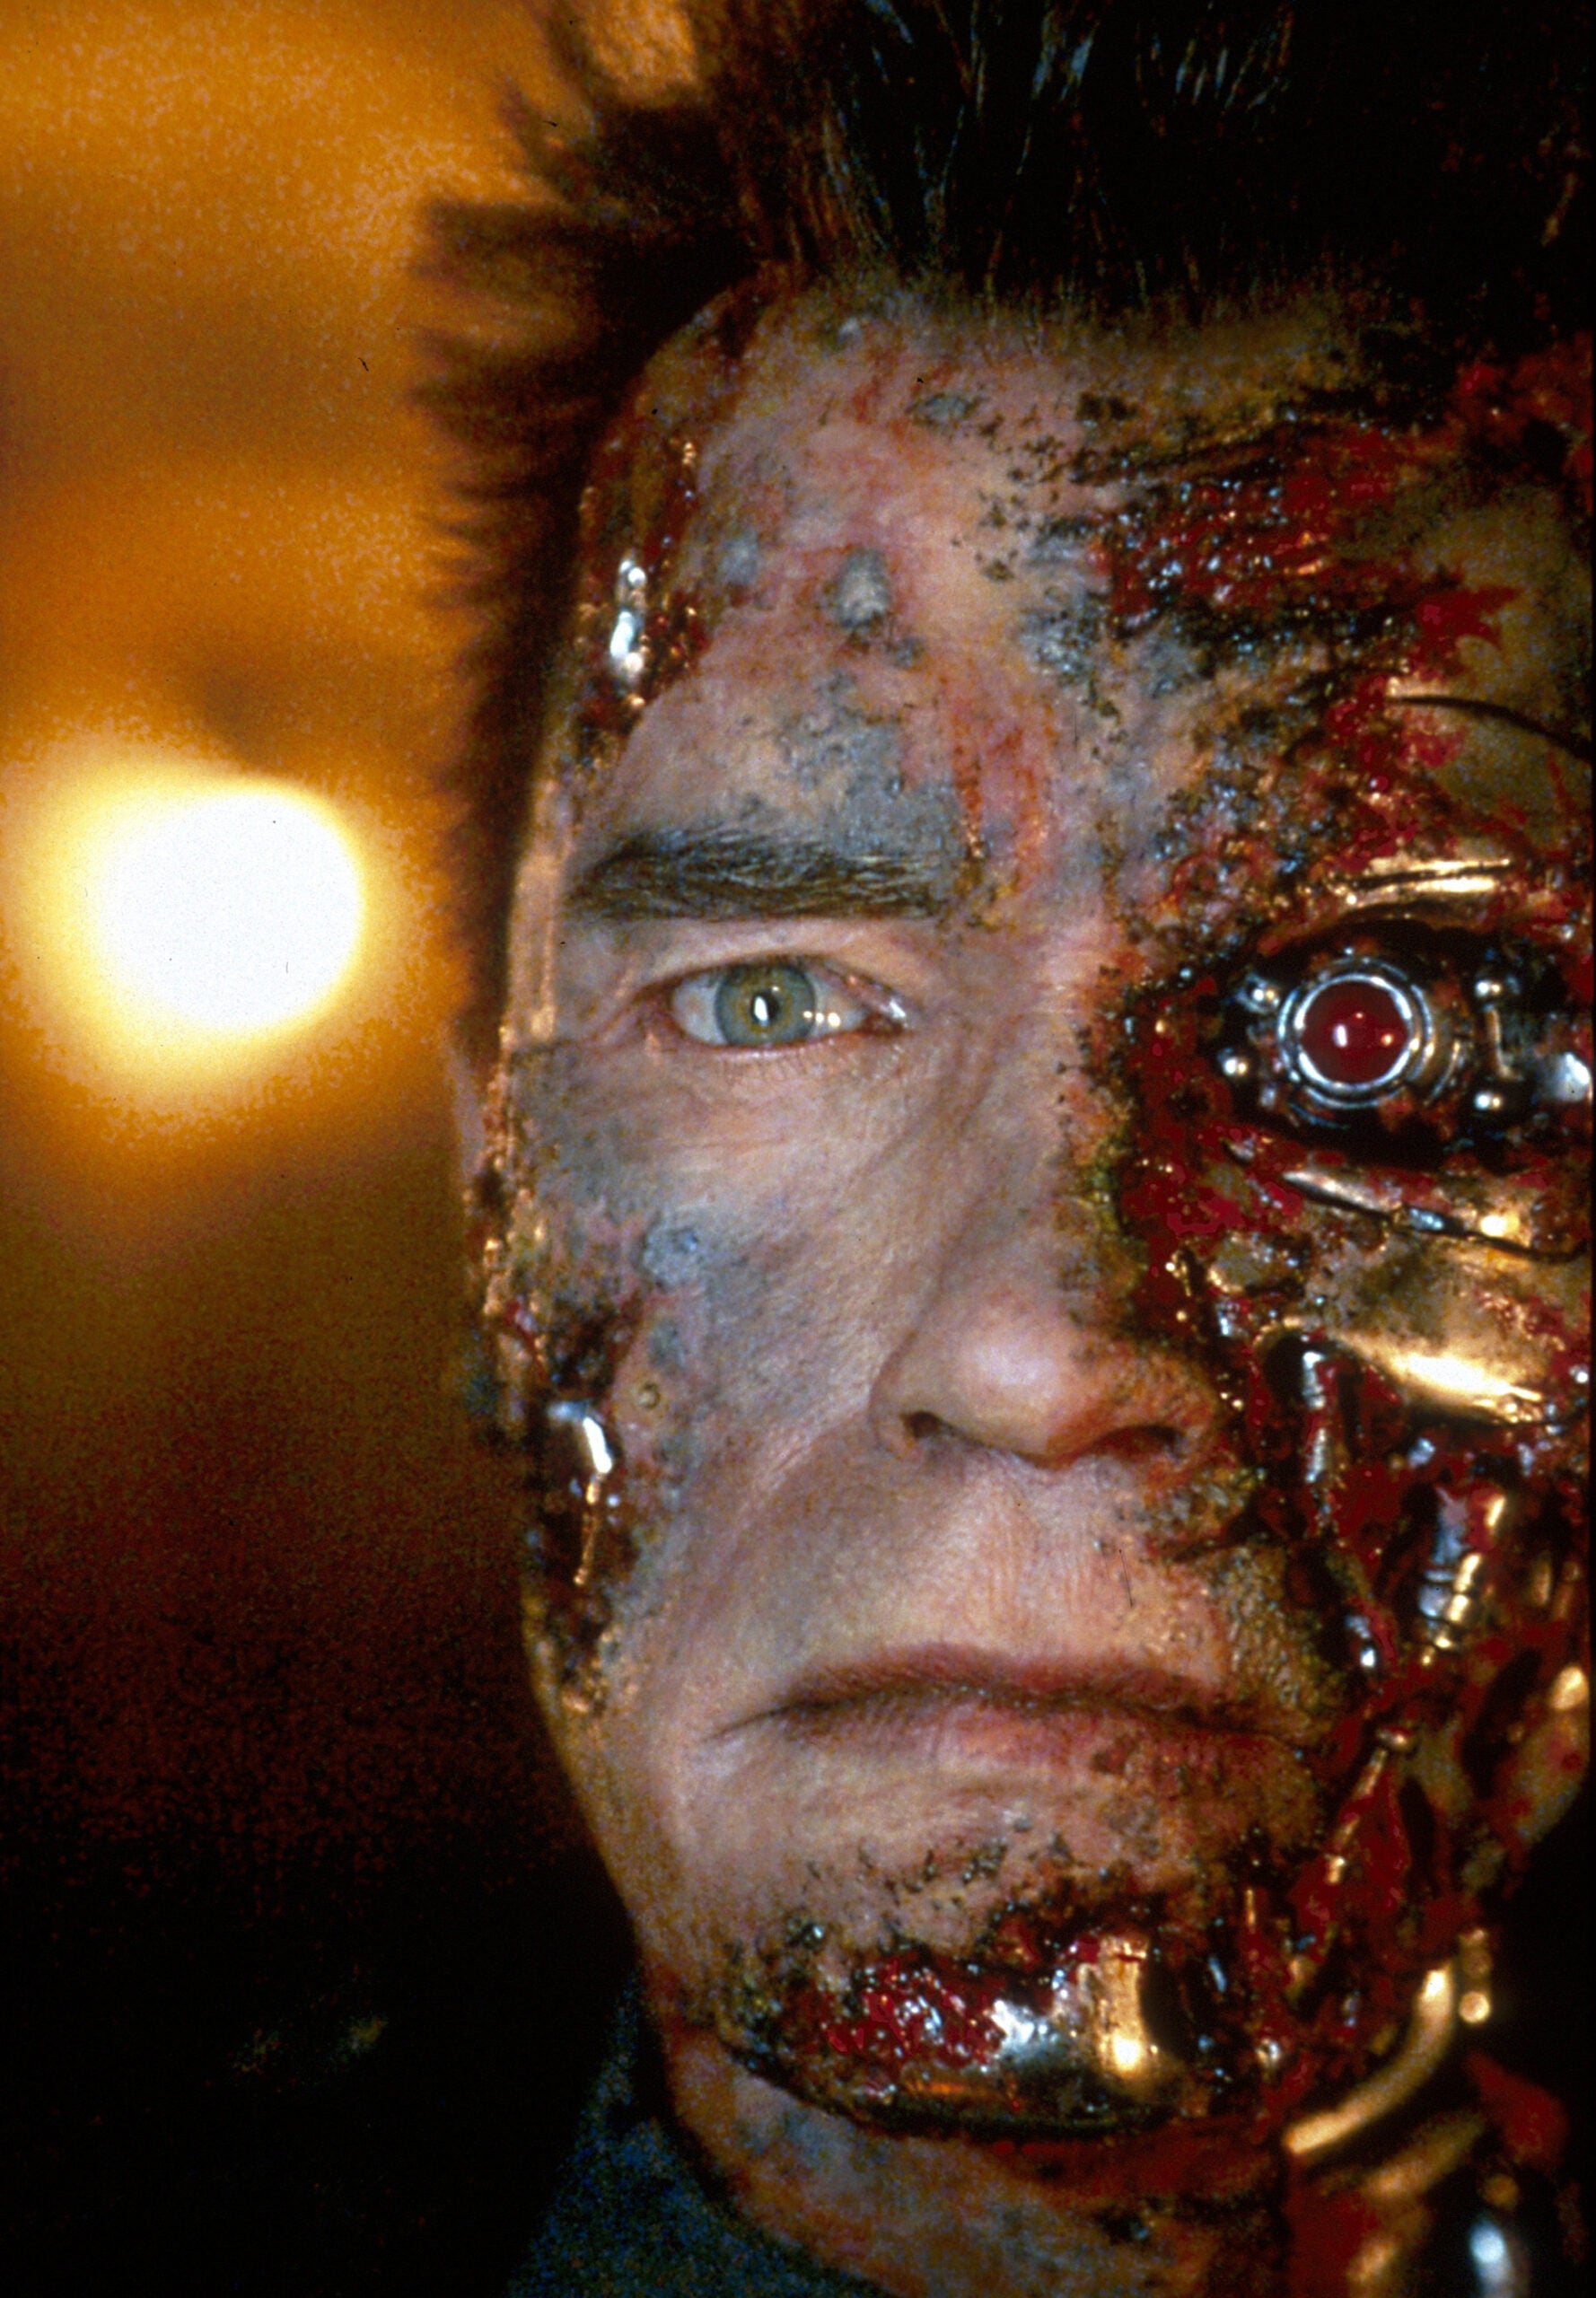 Terminator face of Arnold Schwarzenegger covering part of the metal face of the robot.